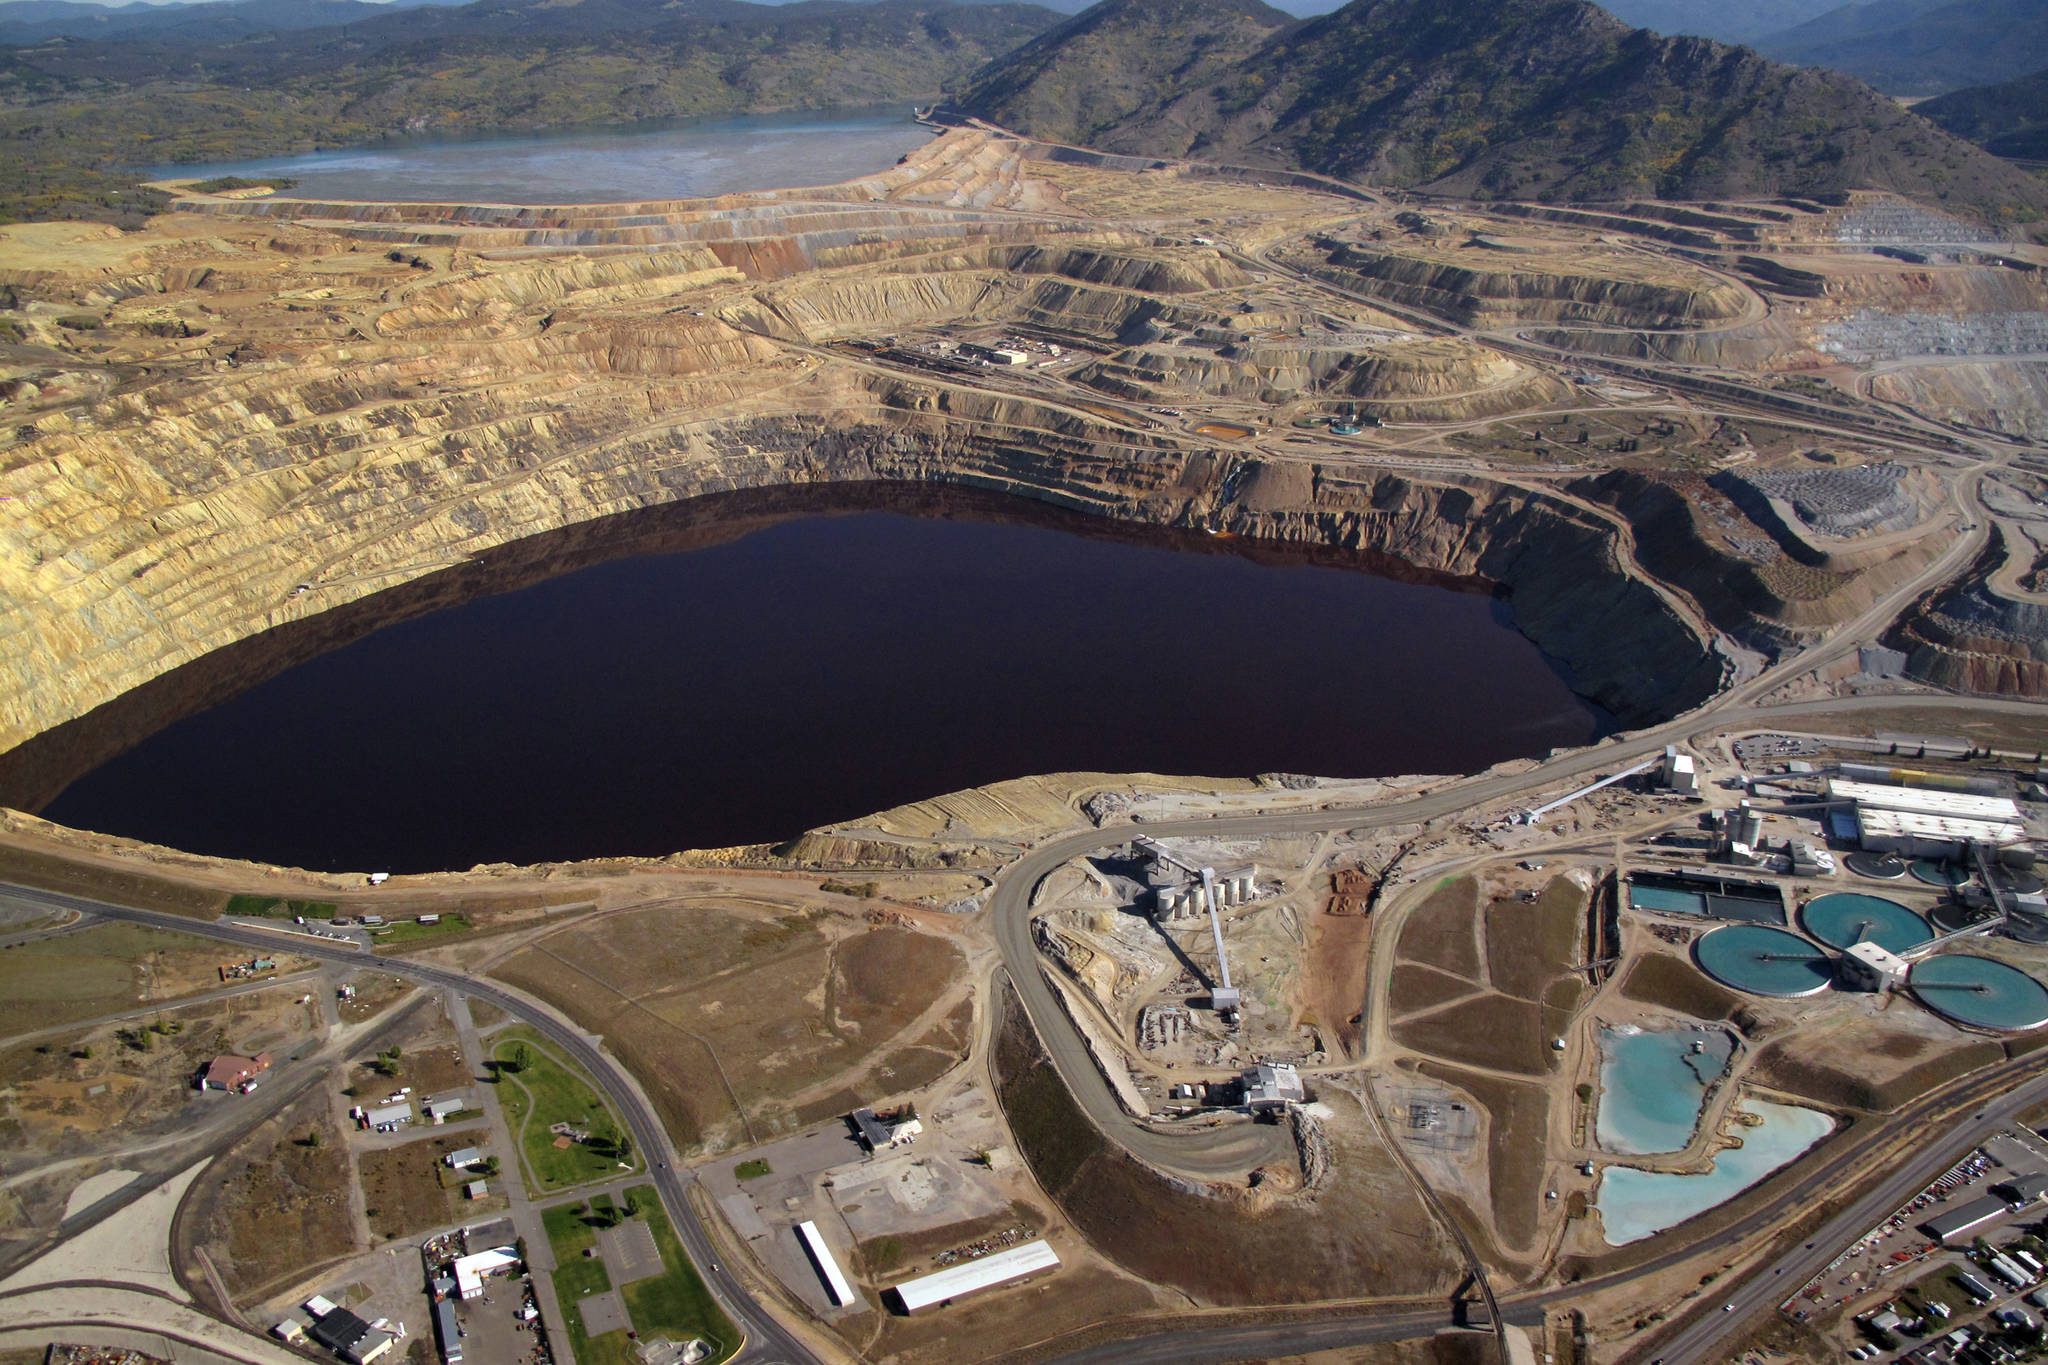 The Berkeley Pit abuts the City of Butte on Silver Bow Creek in southwestern Montana. (Courtesy Photo)